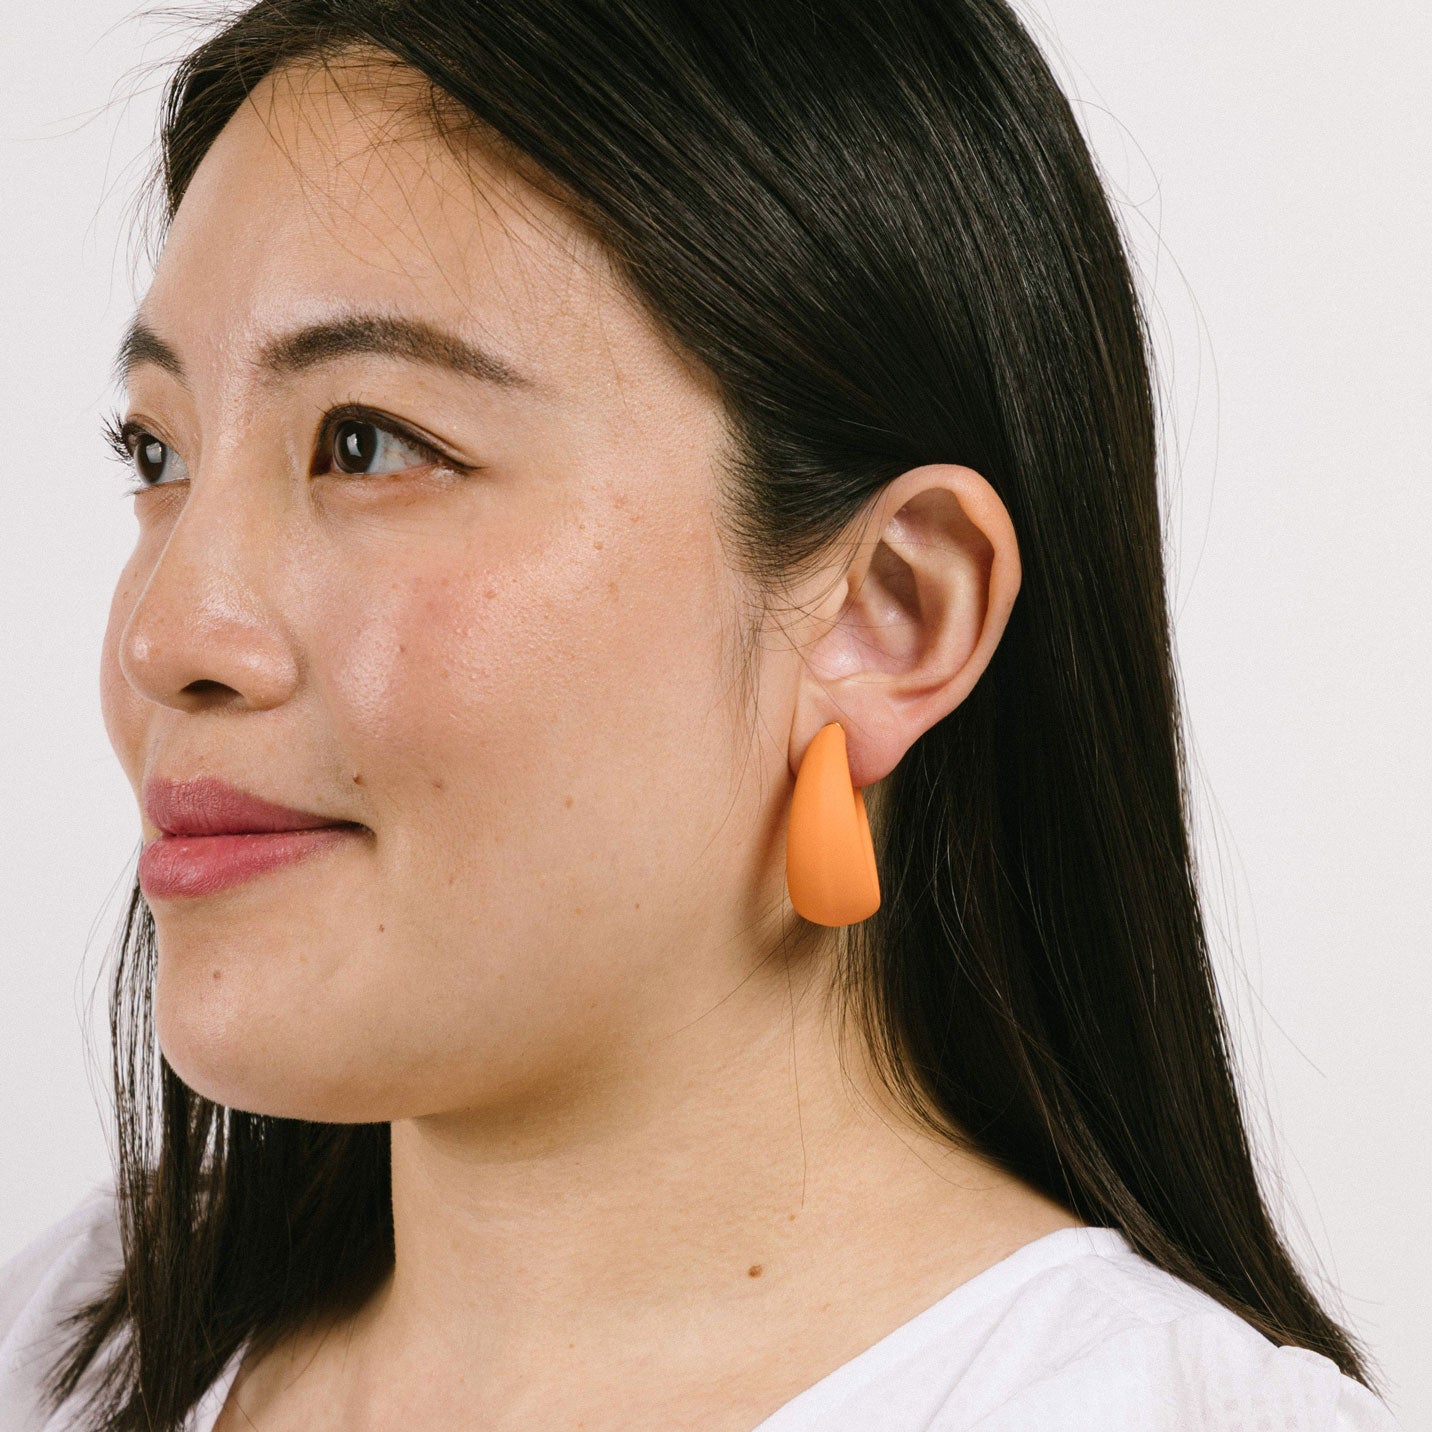 Model wearing stylish orange screwback clip-on earrings, ideal for various ear types. These earrings offer a secure hold and manual adjustment for personalized comfort. Crafted from gold tone copper metal alloy and acrylic. 